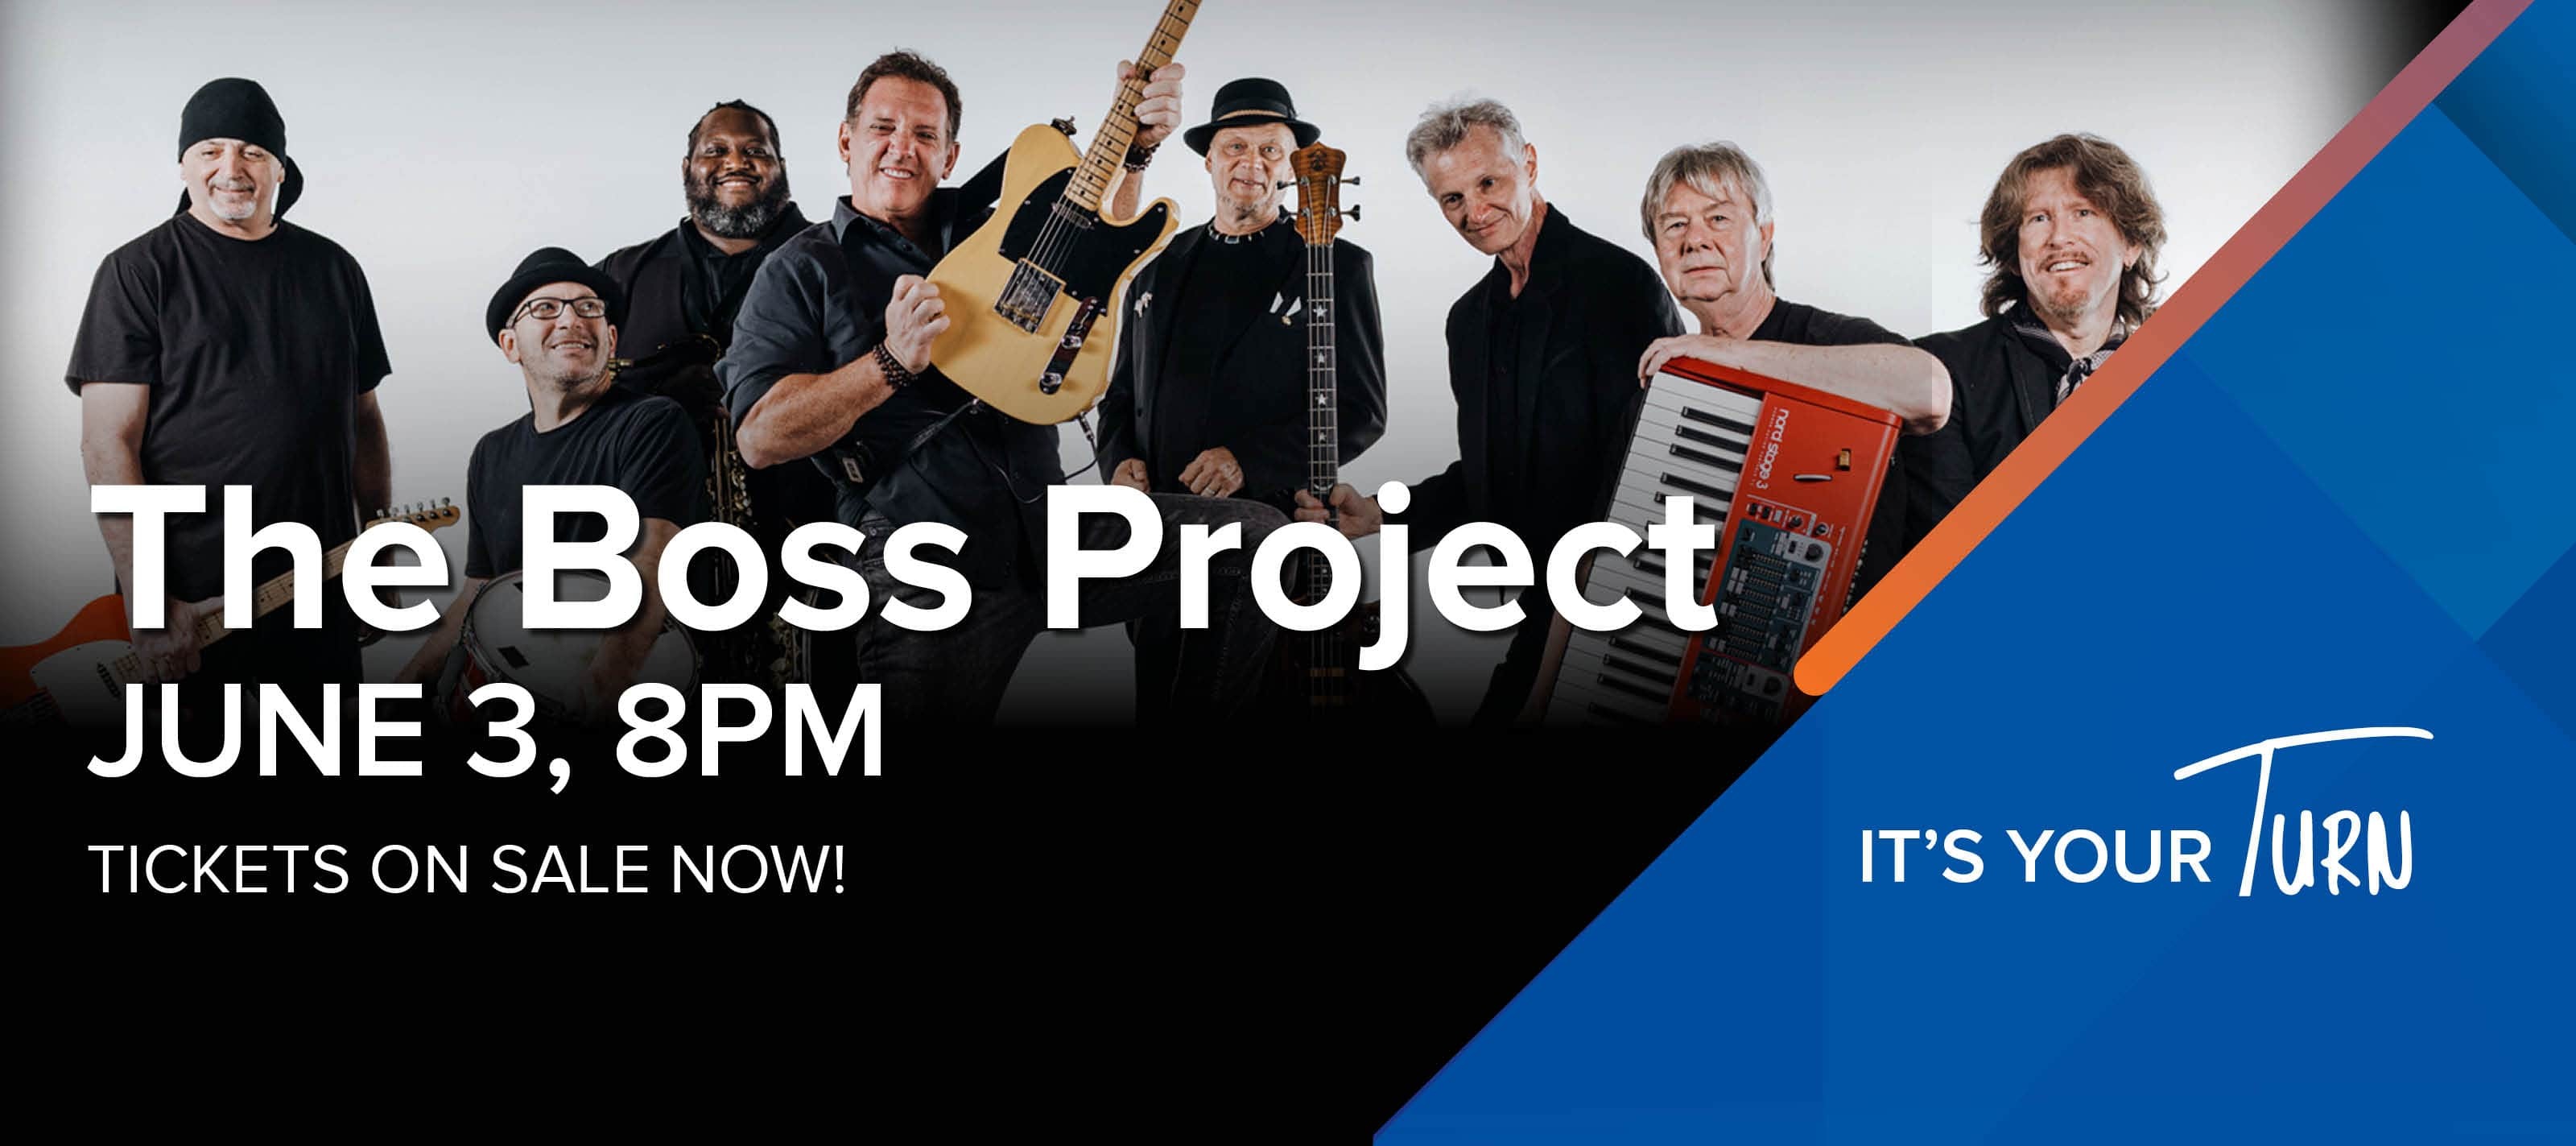 The Boss Project June 3 at 8pm Tickets On Sale Now